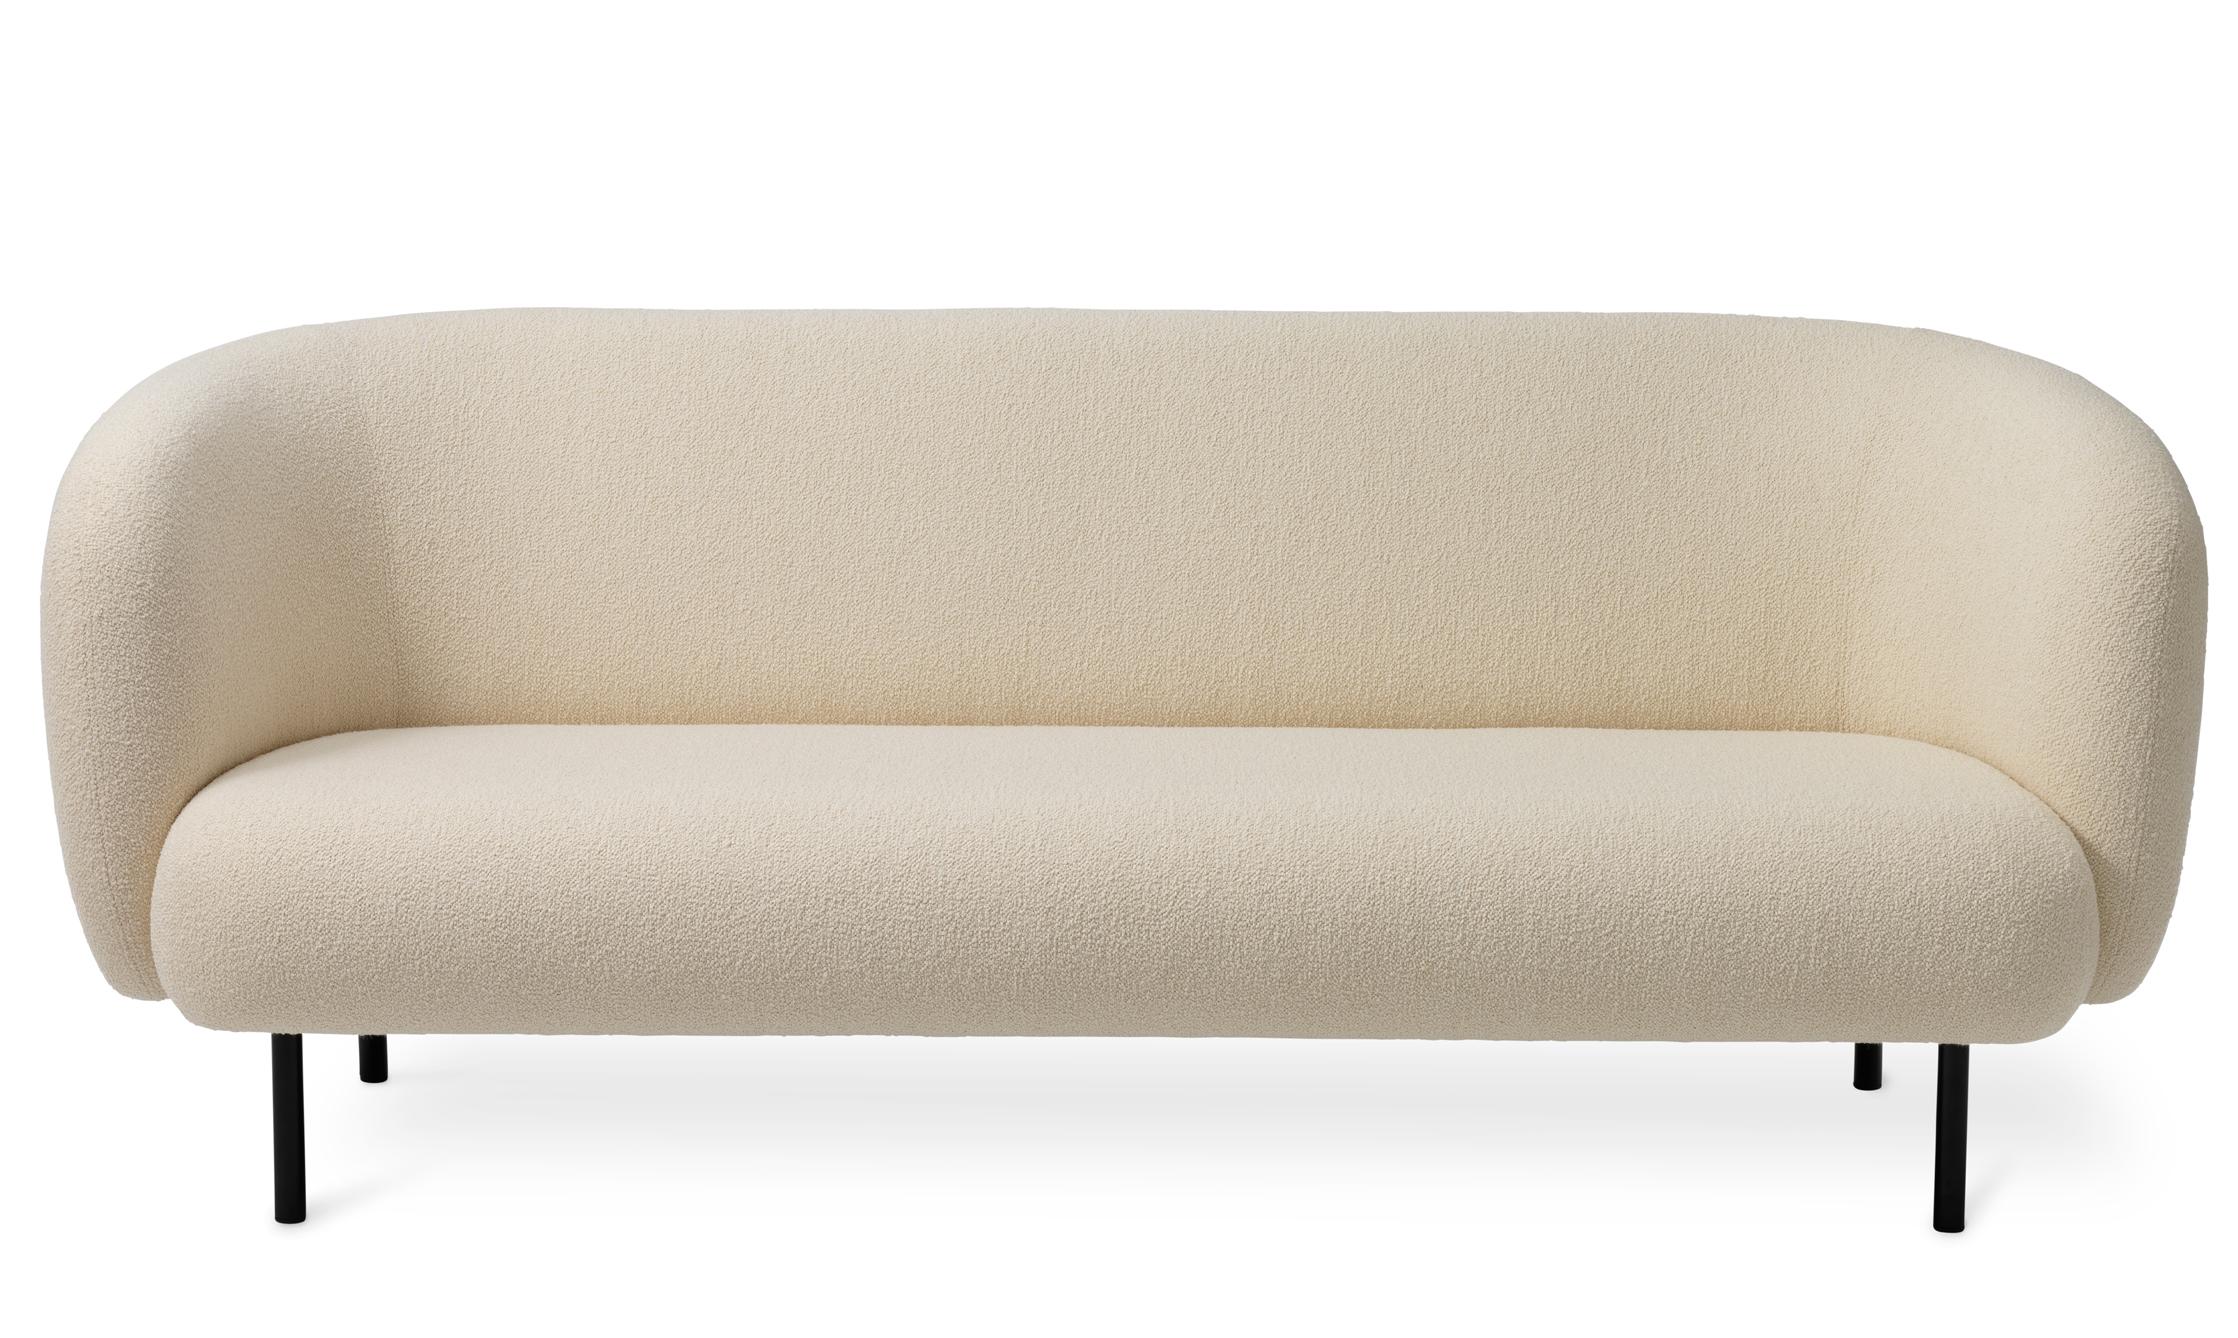 For Sale: White (Barnum 24) Cape 3-Seat Sofa, by Charlotte Høncke from Warm Nordic